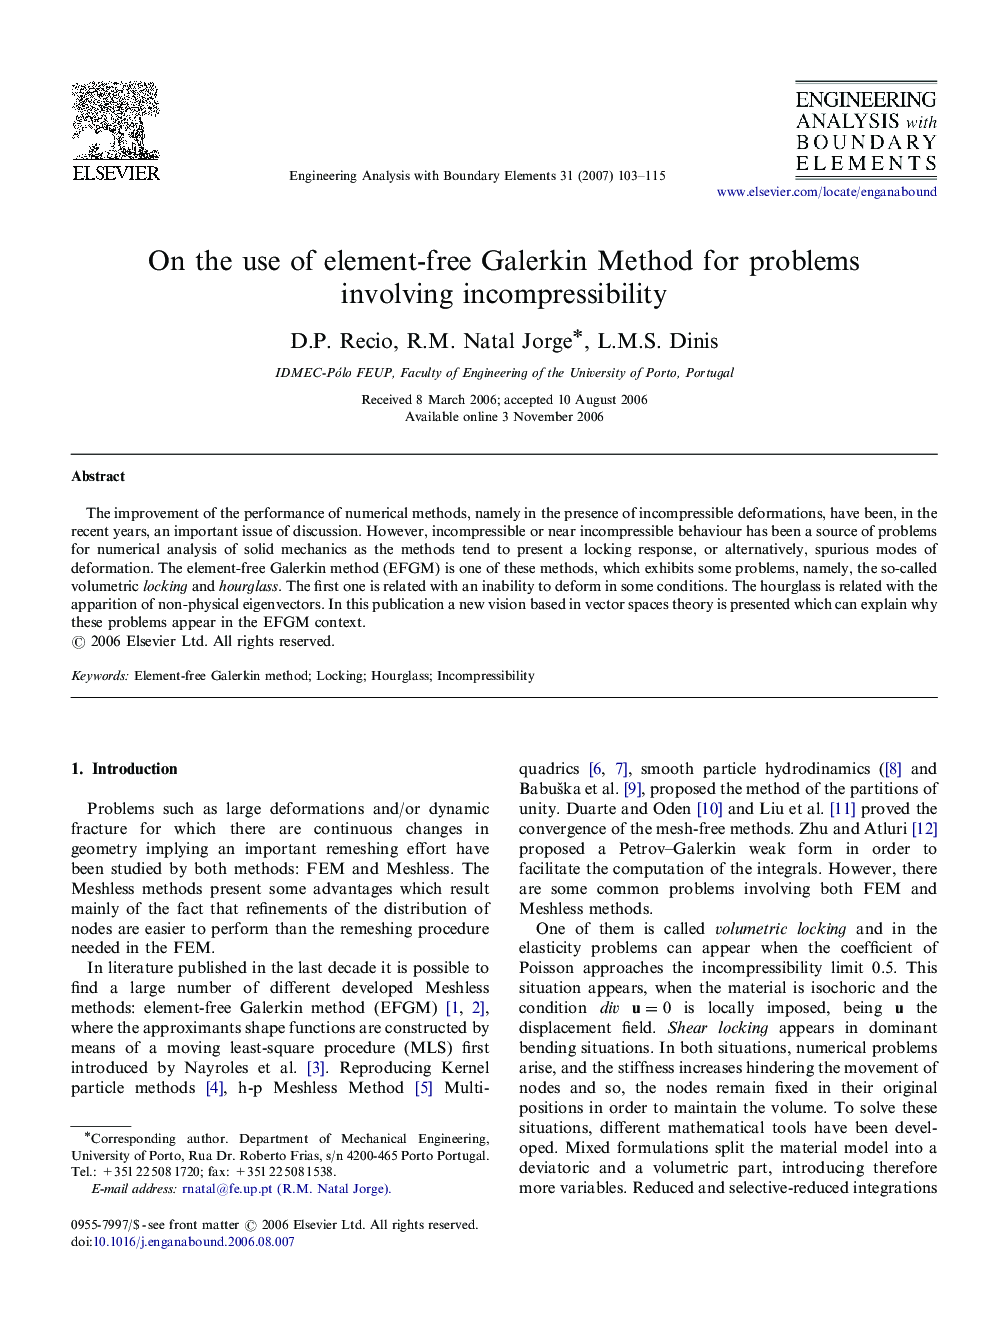 On the use of element-free Galerkin Method for problems involving incompressibility